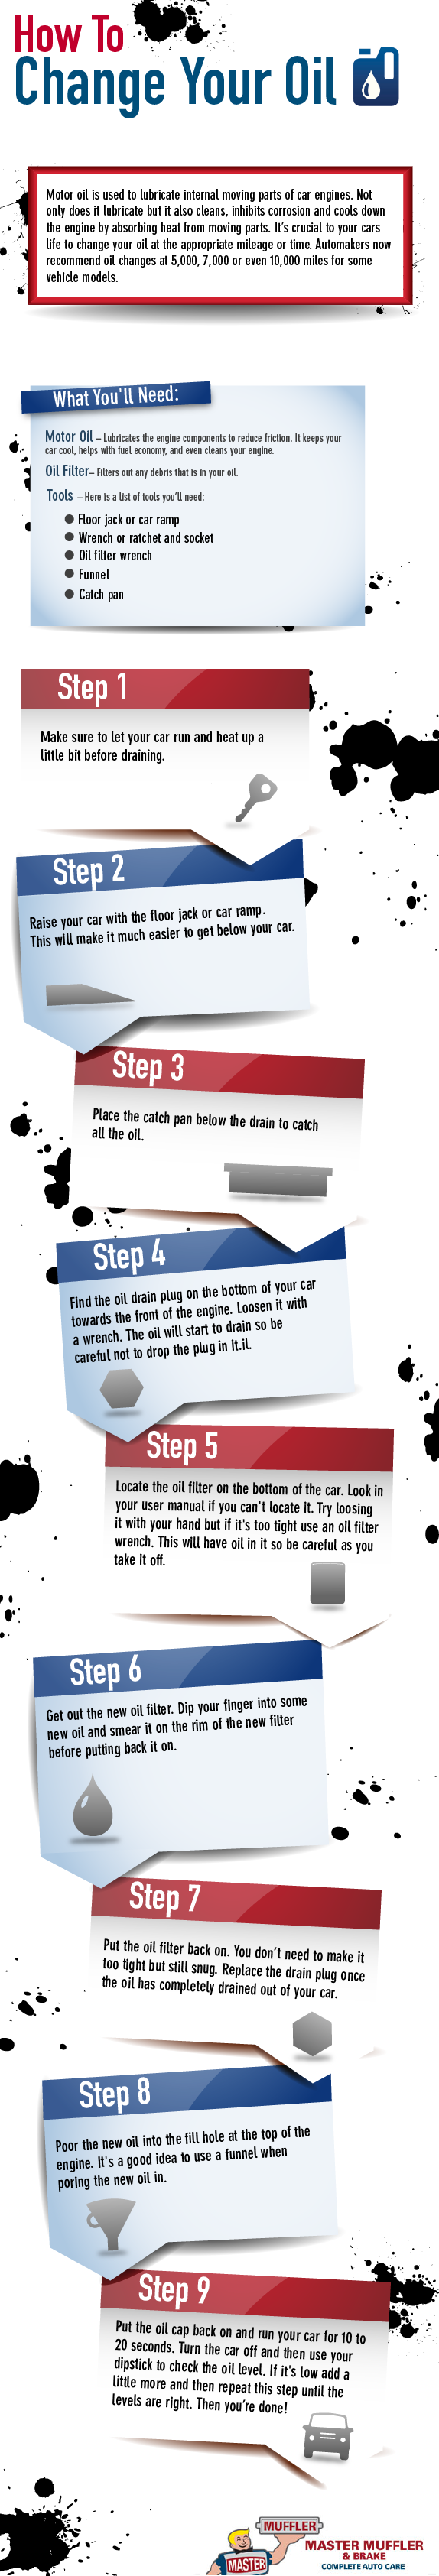 Infographic titled How to Change Your Oil